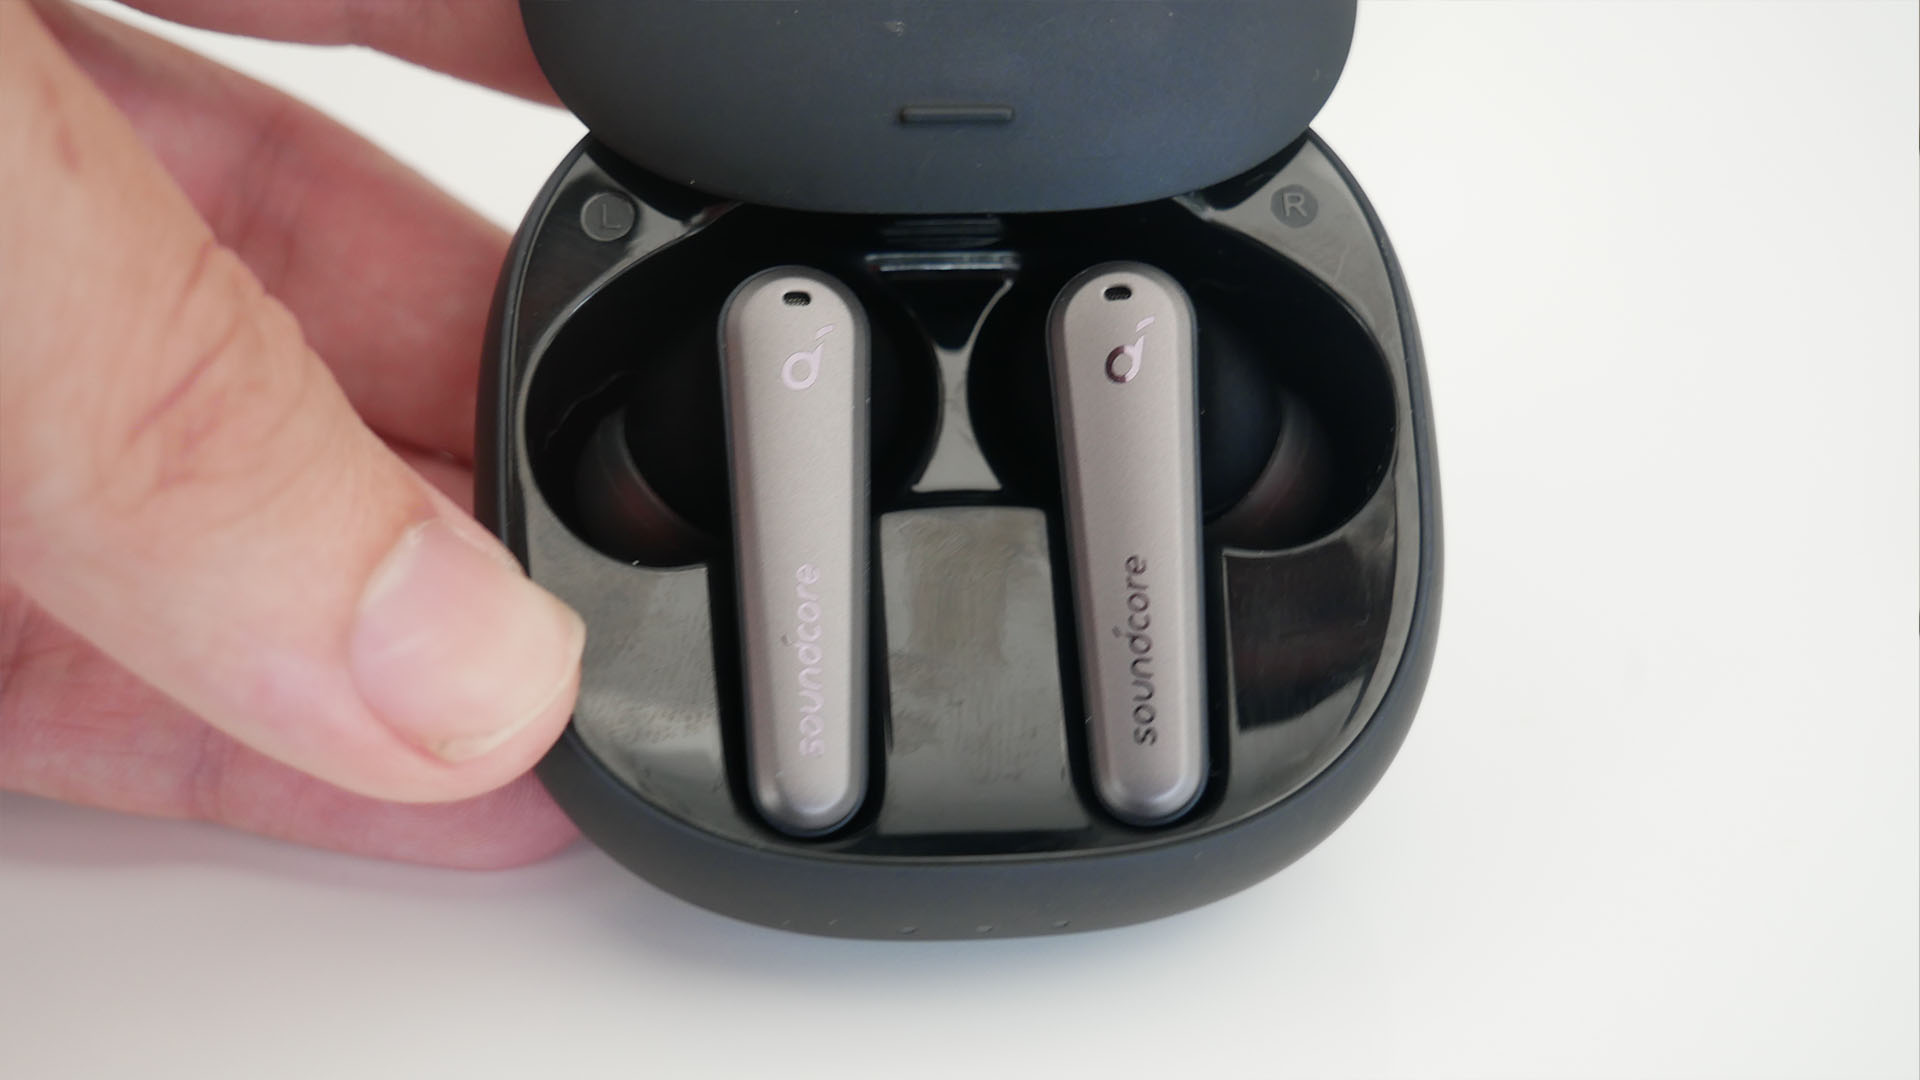 Image of Liberty Air Pro earbuds from Soundcore